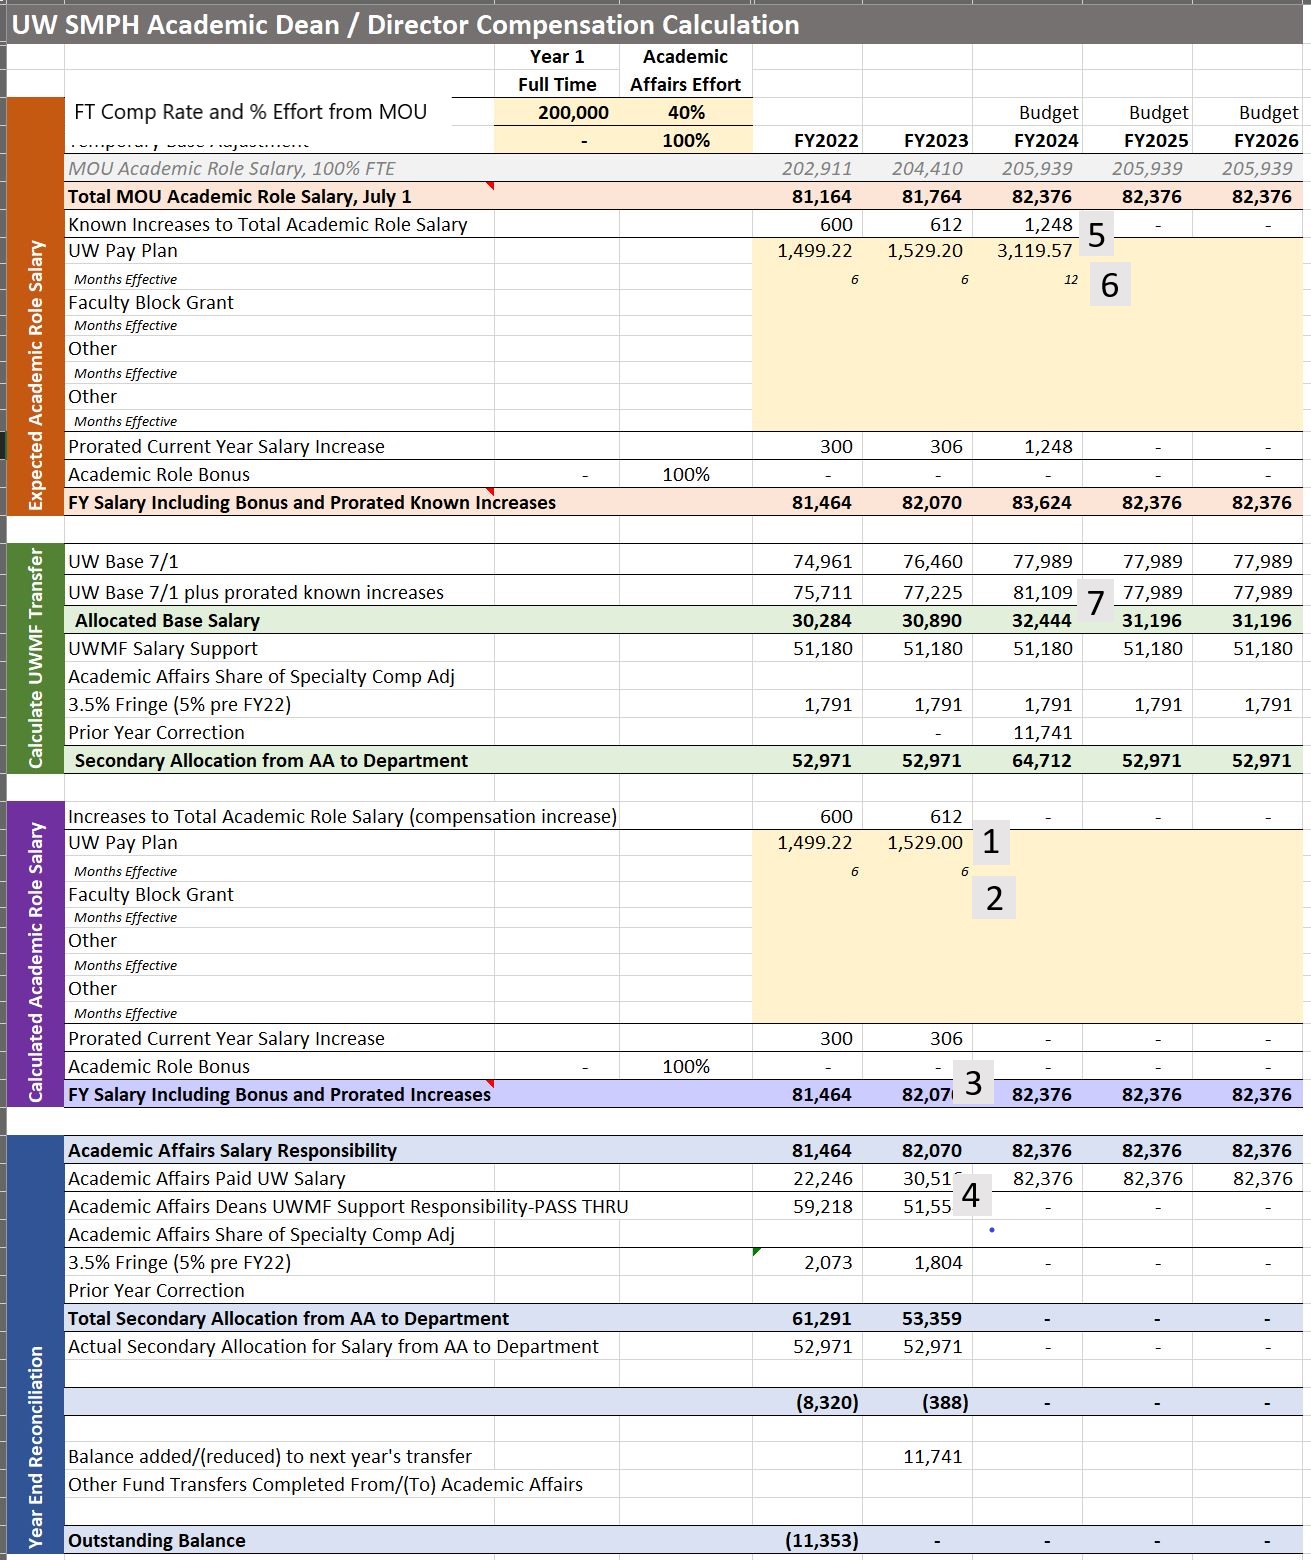 Spreadsheet used to calculate academic leadership compensation.